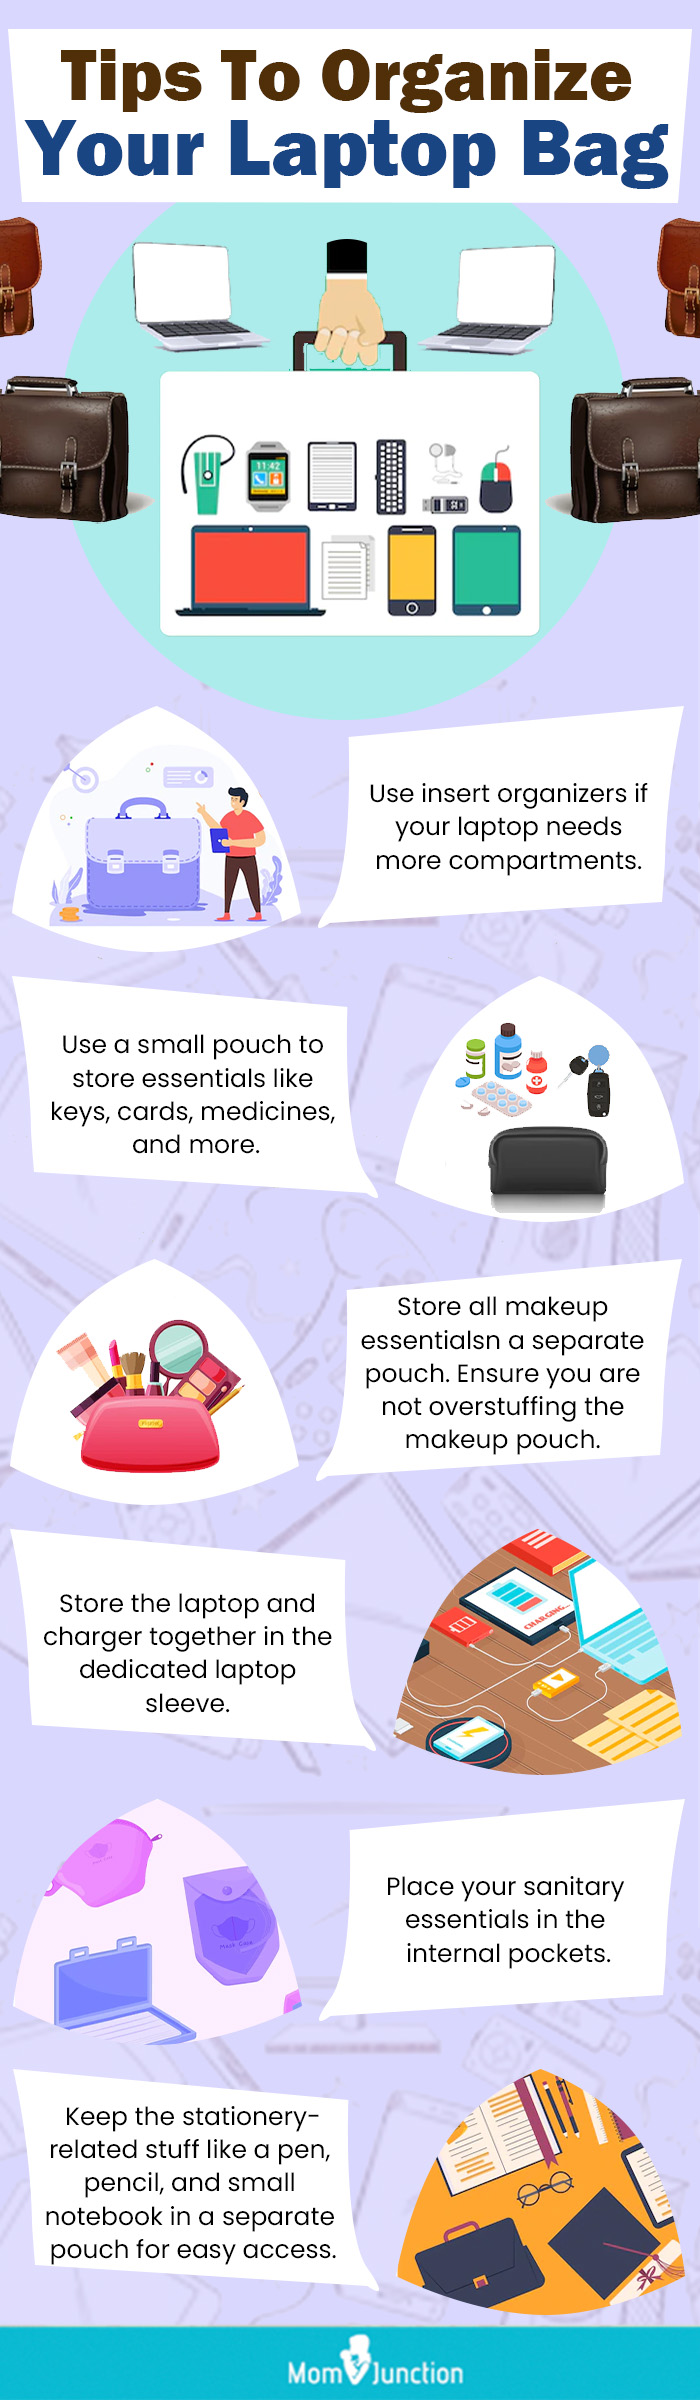 Tips To Organize Your Laptop Bag (infographic)